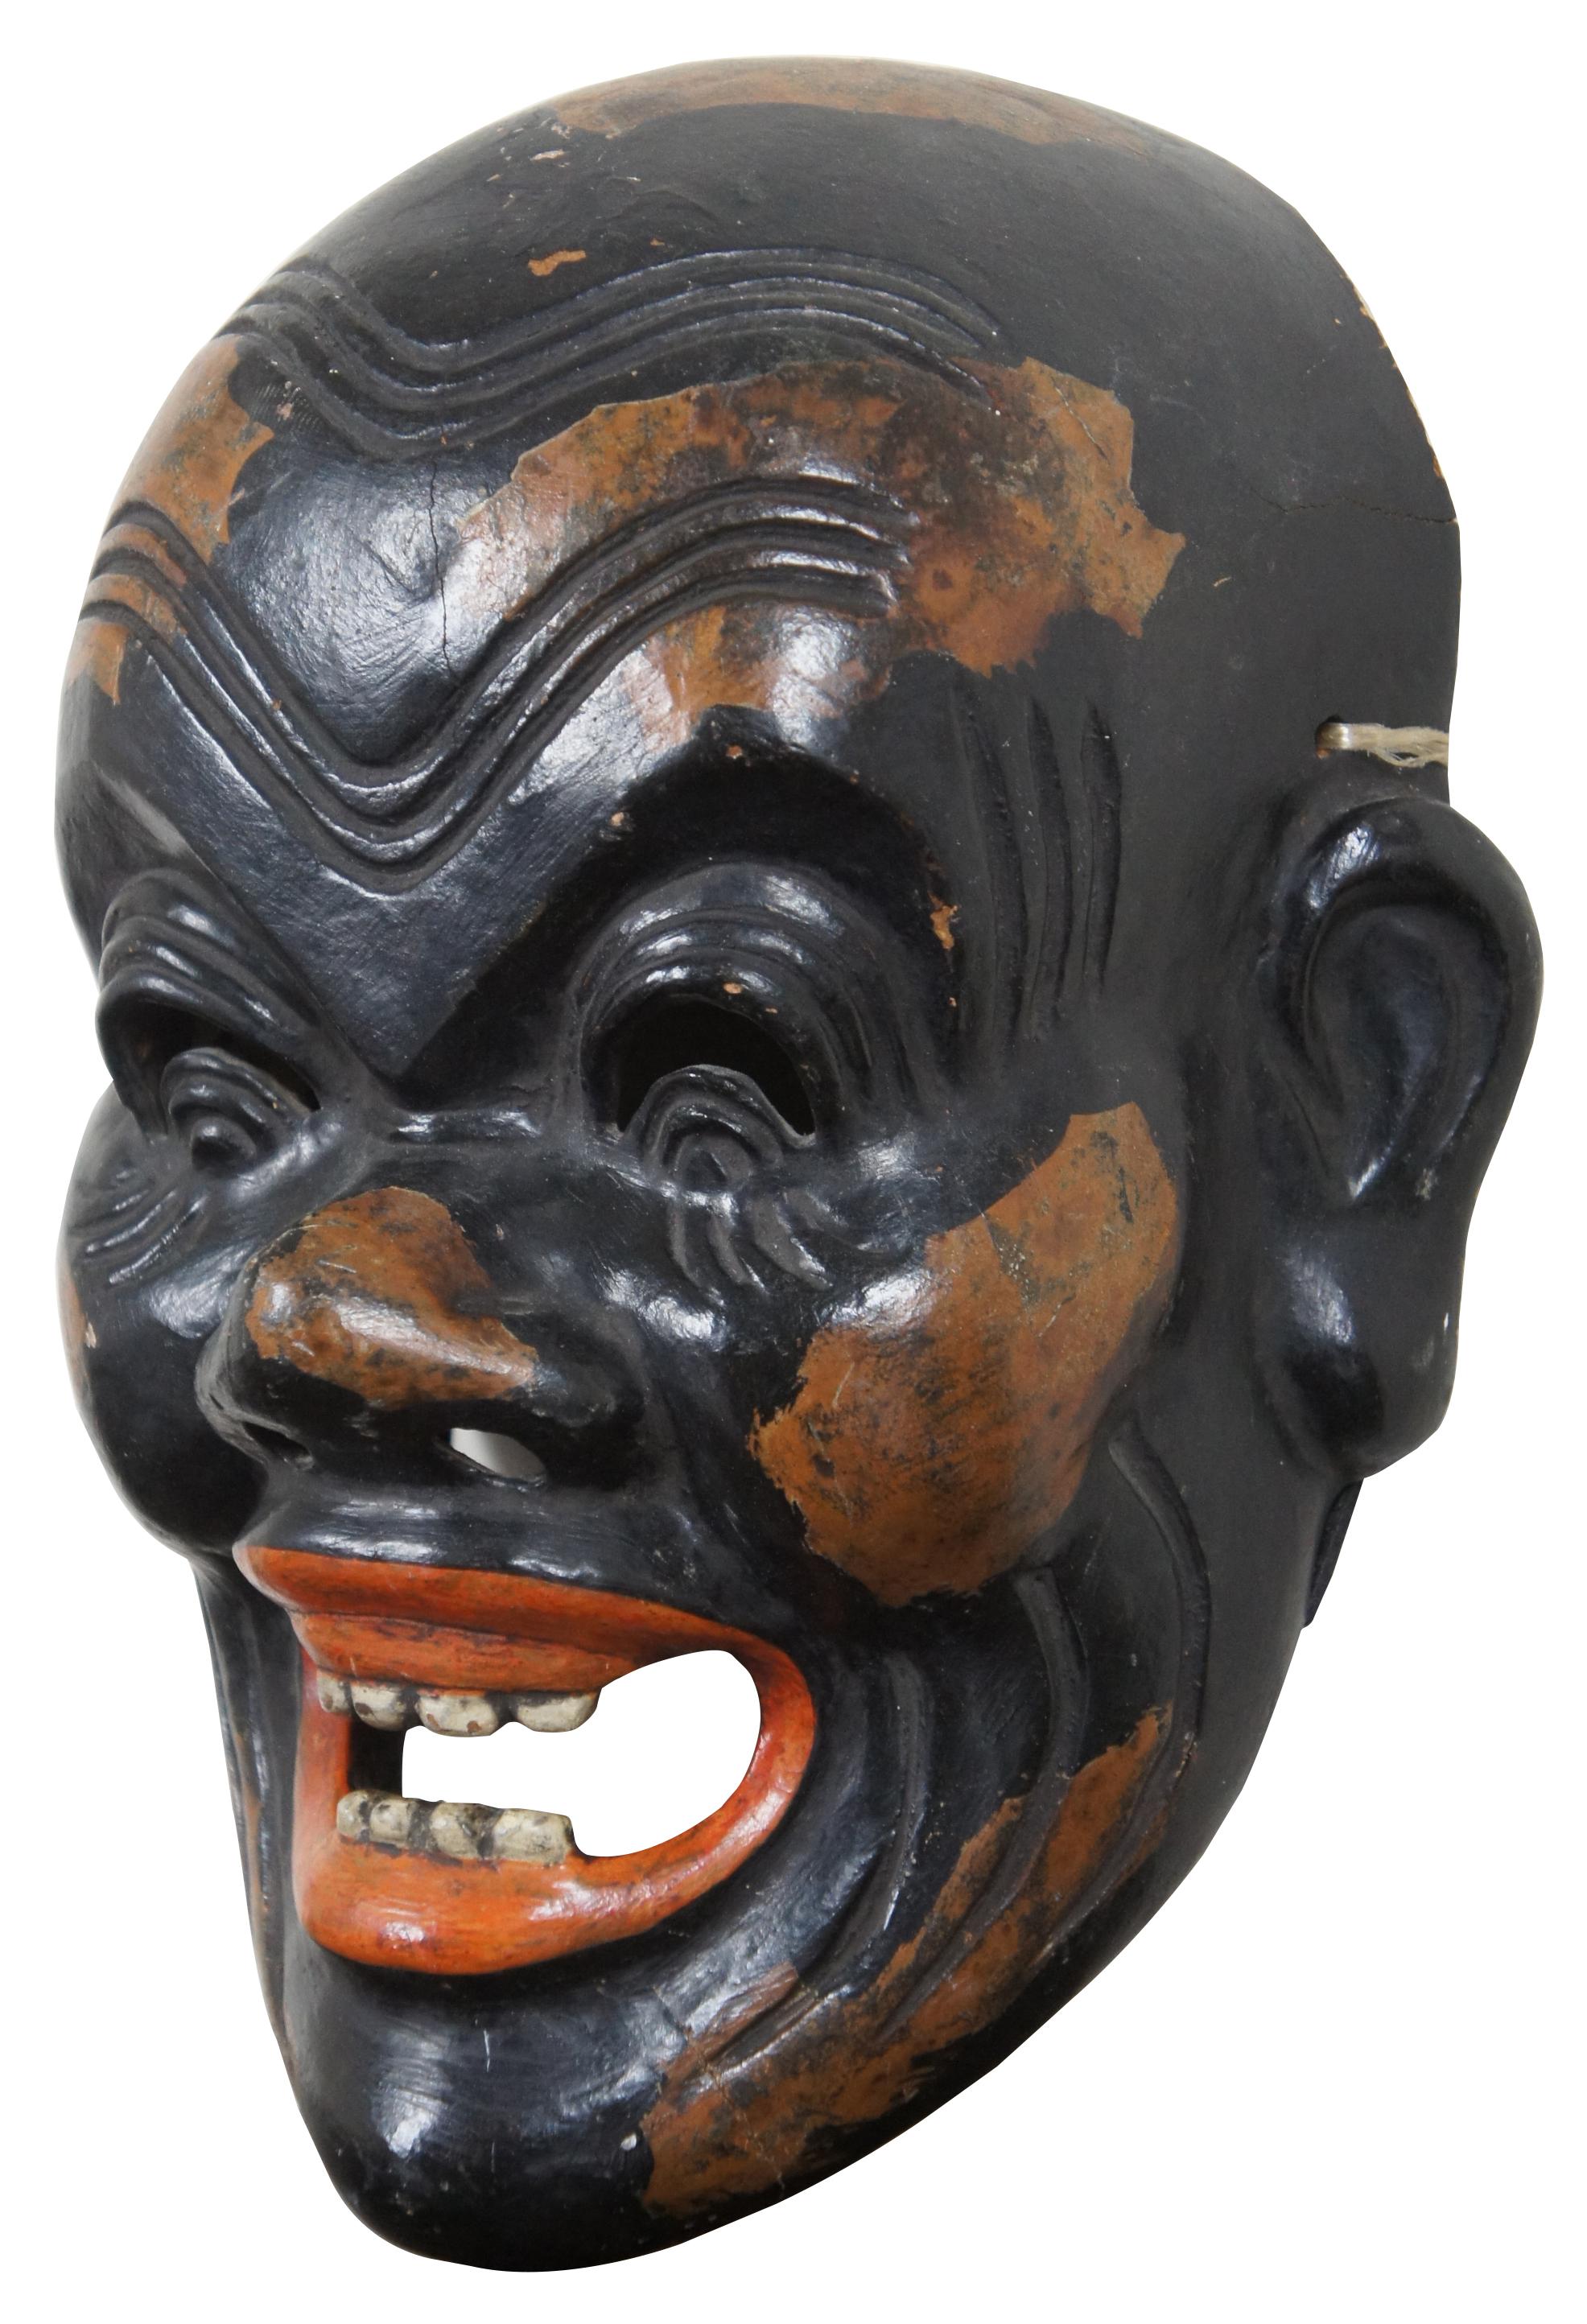 Antique Japanese Bugaku or Noh Mask, late 19th century antique Japanese Bugaku mask of an old man laughing. The mask is made of wood and lacquer. Hand painted and signed on the inside. Japan, late Edo or early Meiji period. The character is known as